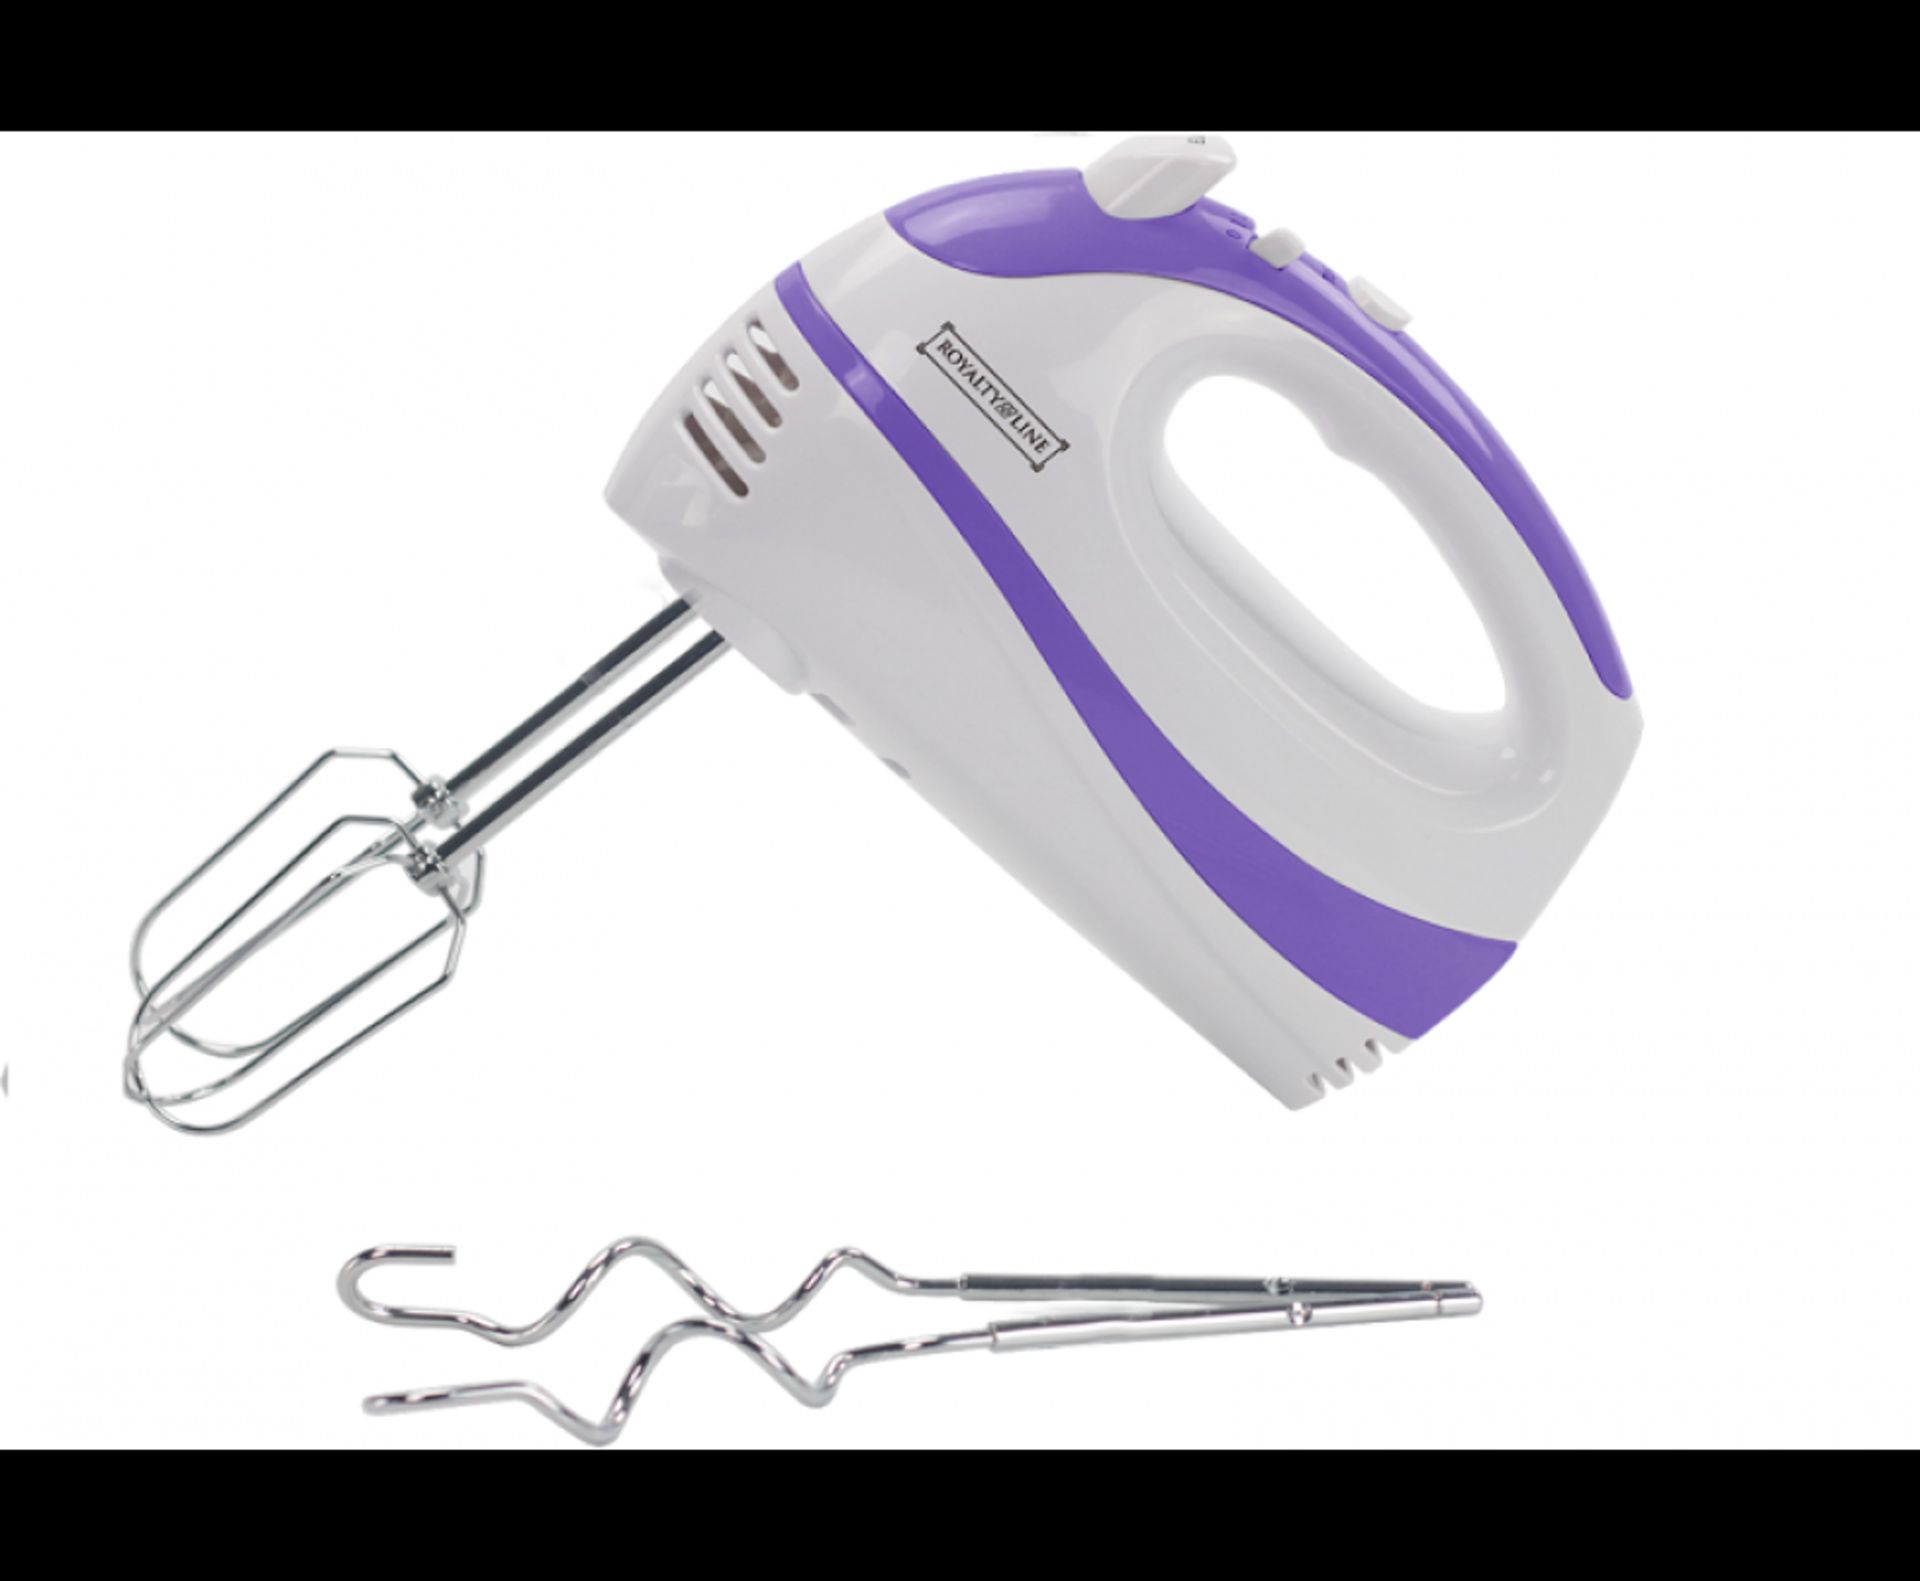 V Brand New Royalty Line 200w Hand Mixer X 2 YOUR BID PRICE TO BE MULTIPLIED BY TWO